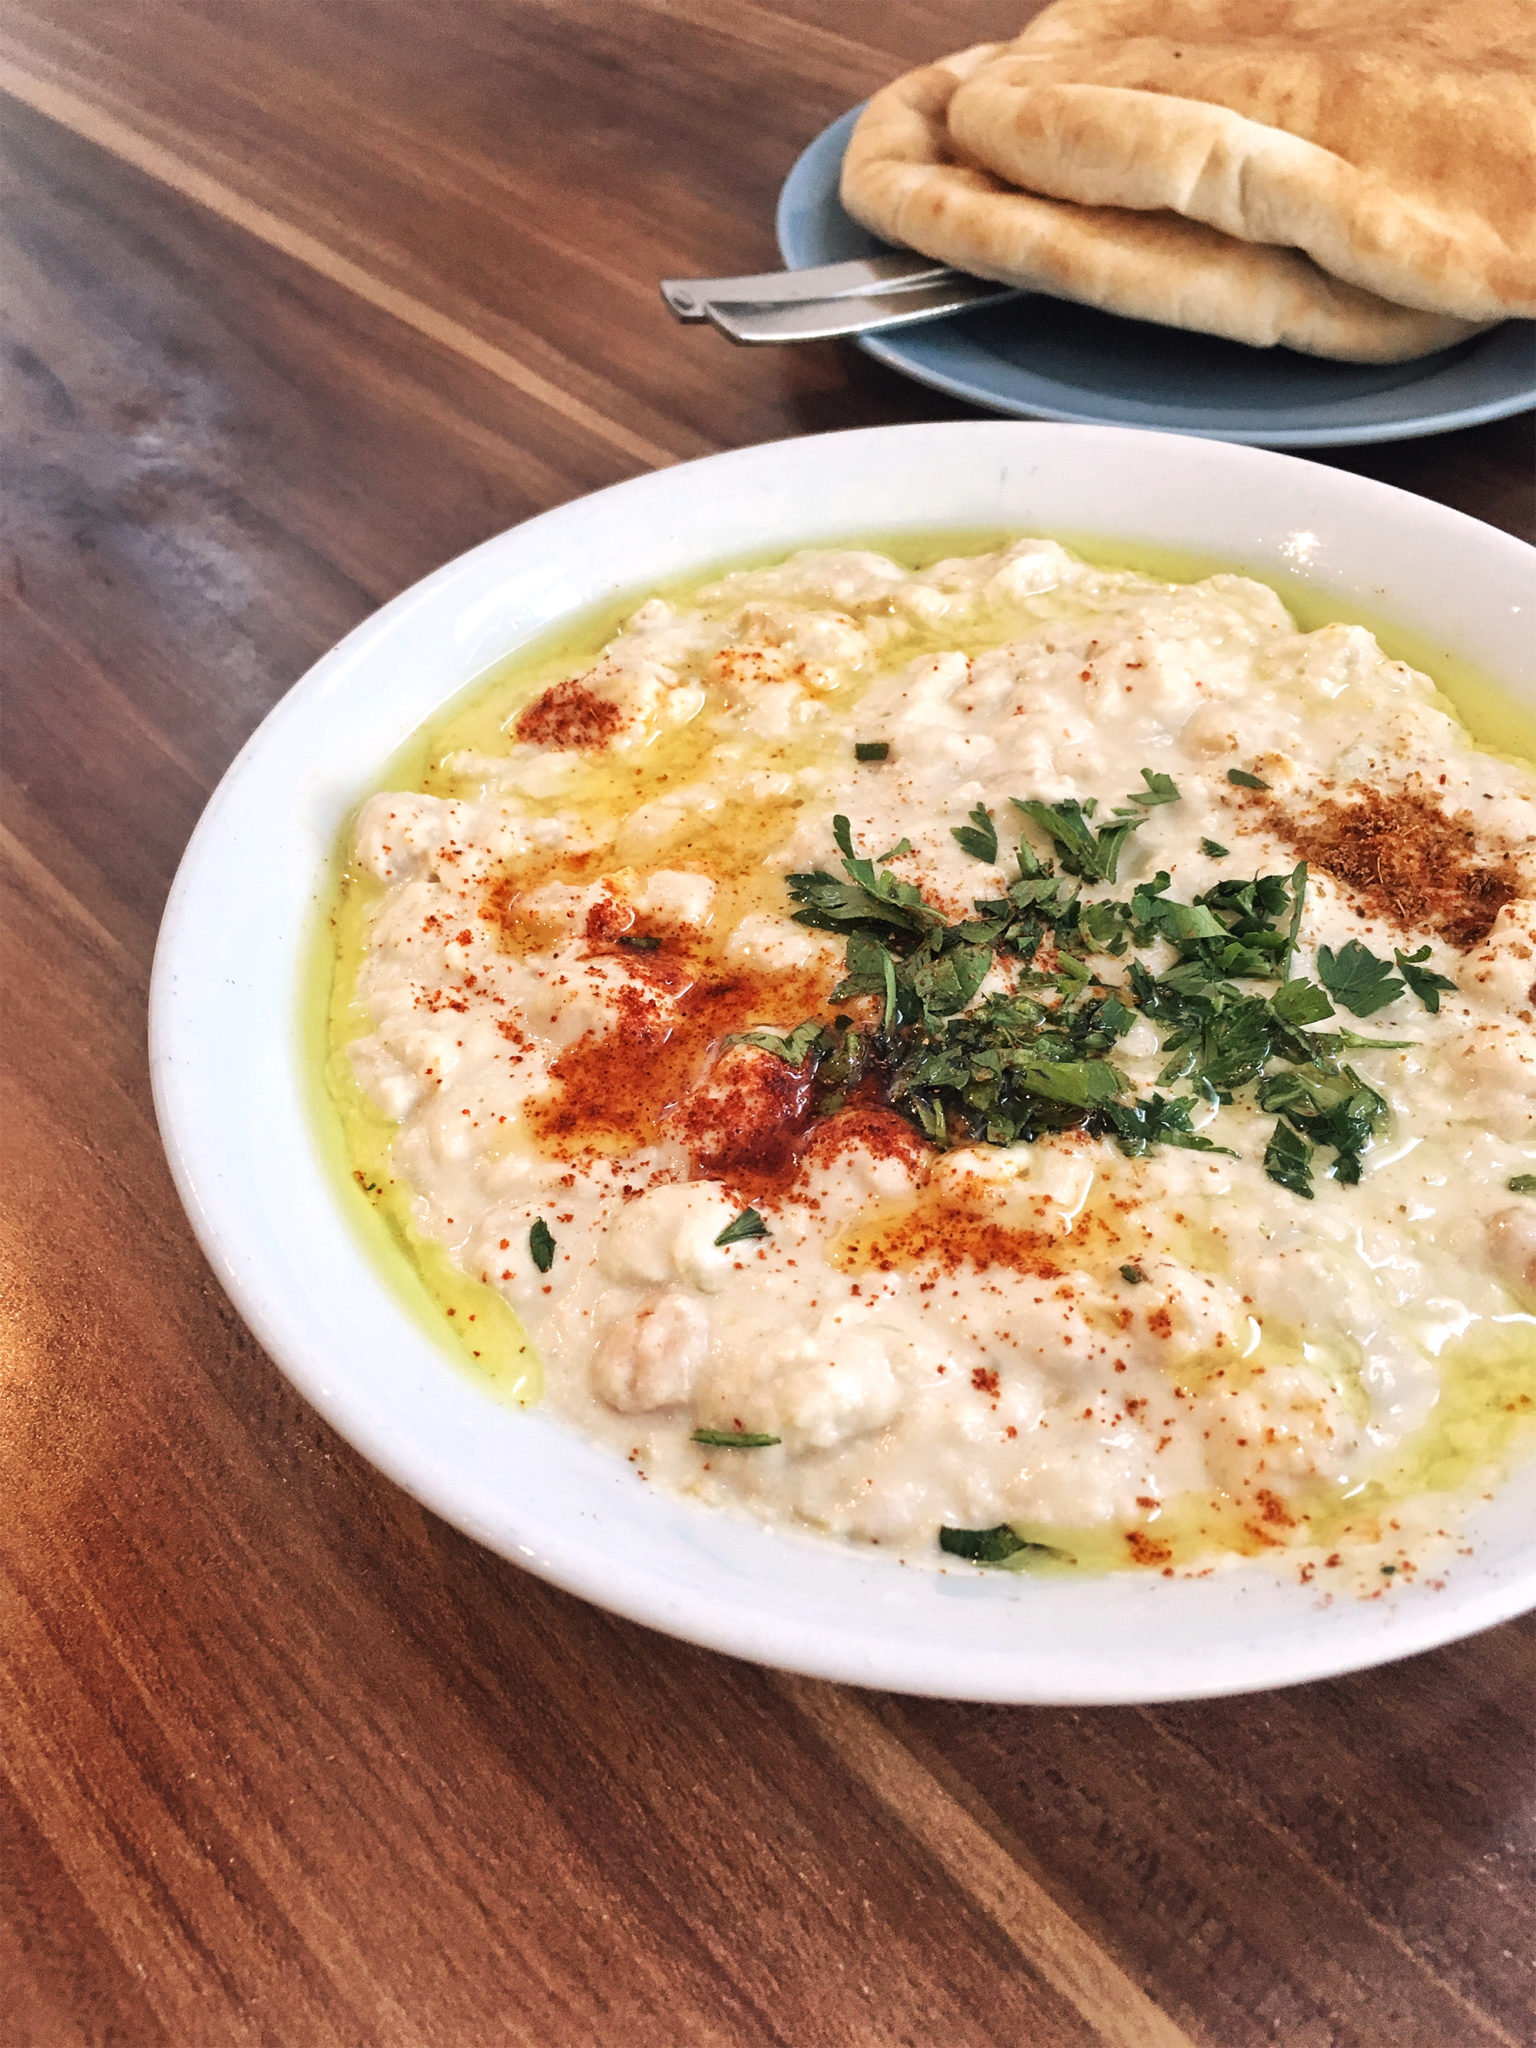 Where to eat in Israel